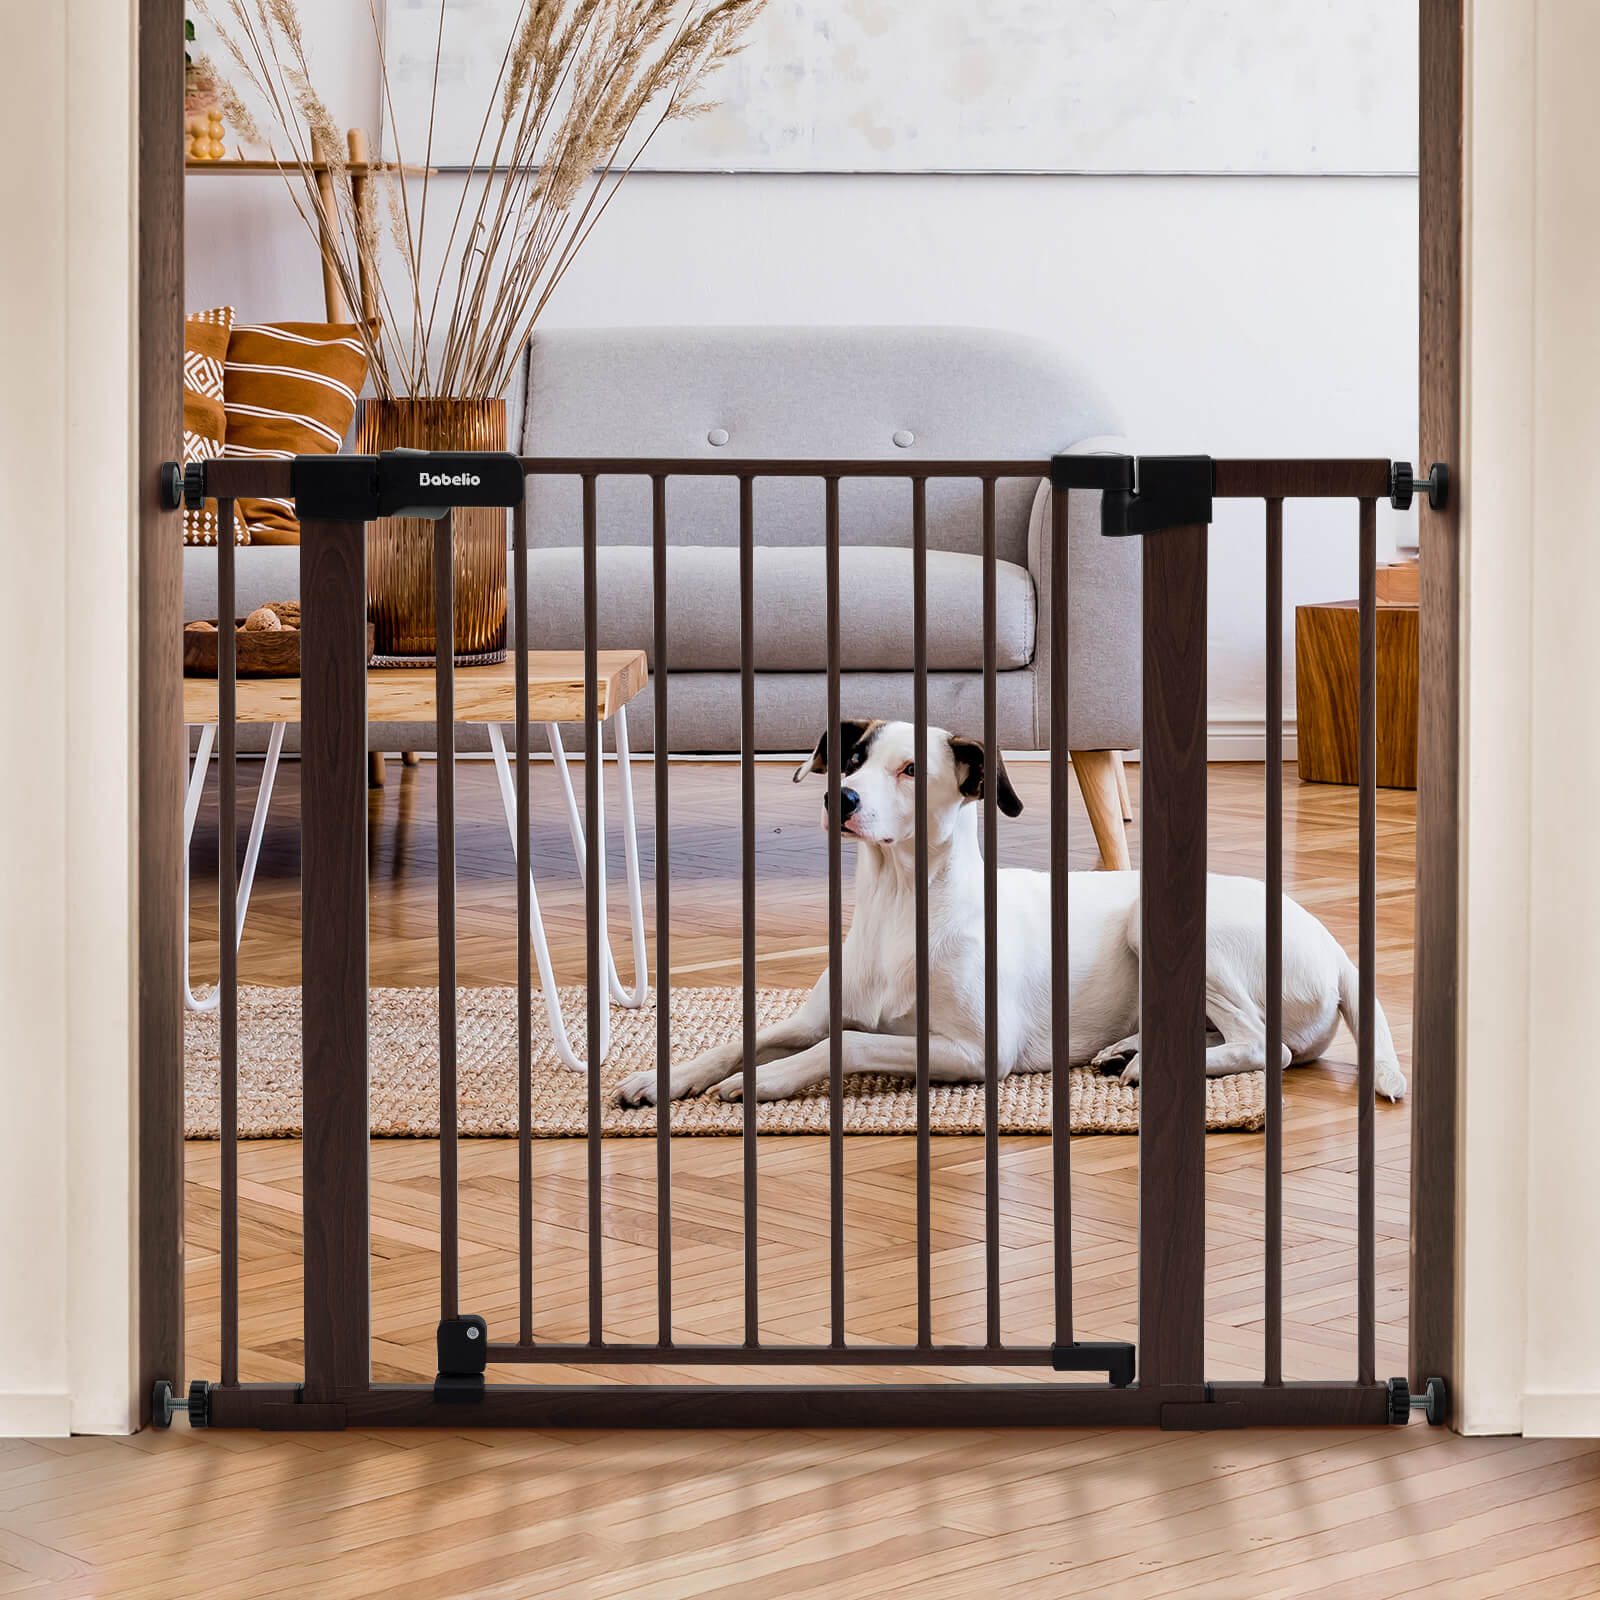 Babelio Adjustable Metal Baby Gate with Wood Pattern – Easy Install, Pressure Mounted, 26-55" Wide, Auto-Close, No Drill